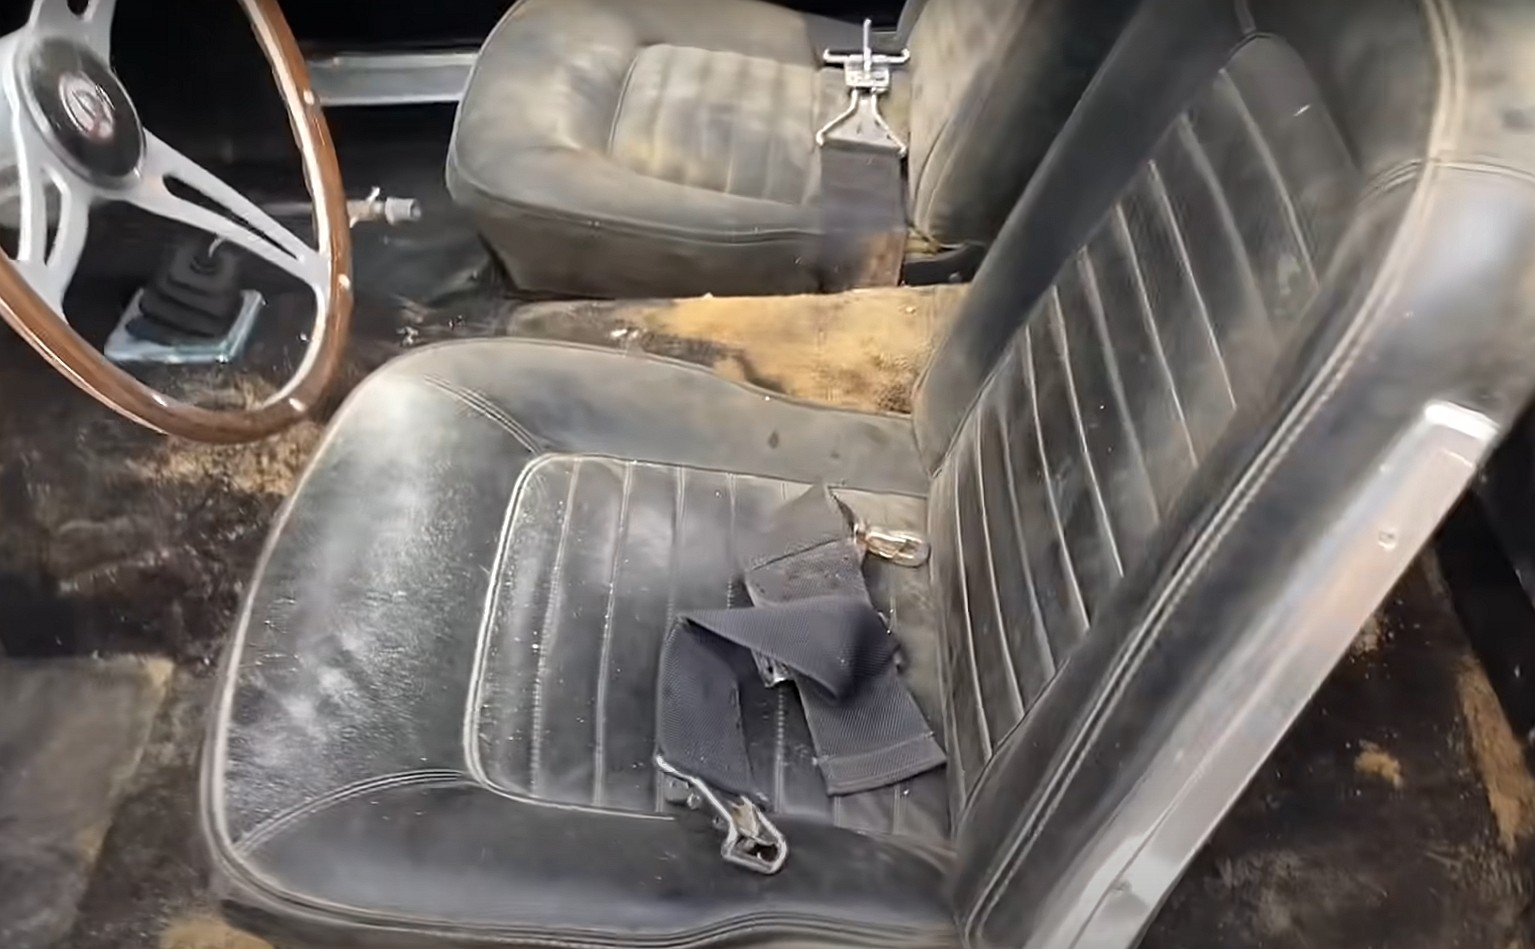 barn find gold 1965 shelby mustang gt350 stored for decades in abandoned house 2